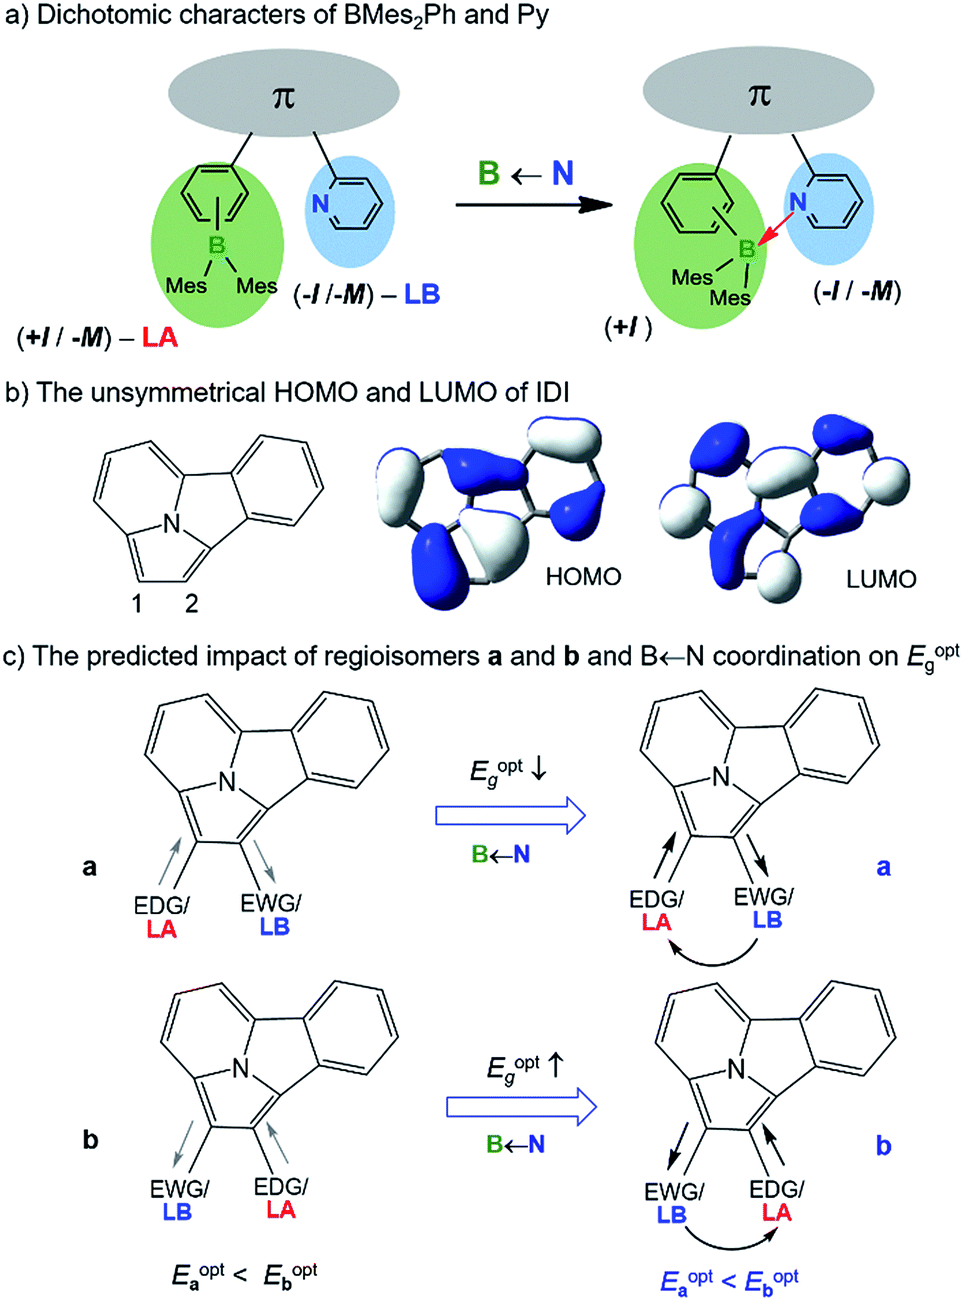 The Opposite And Amplifying Effect Of B N Coordination On Photophysical Properties Of Regioisomers With An Unsymmetrical Backbone Chemical Science Rsc Publishing